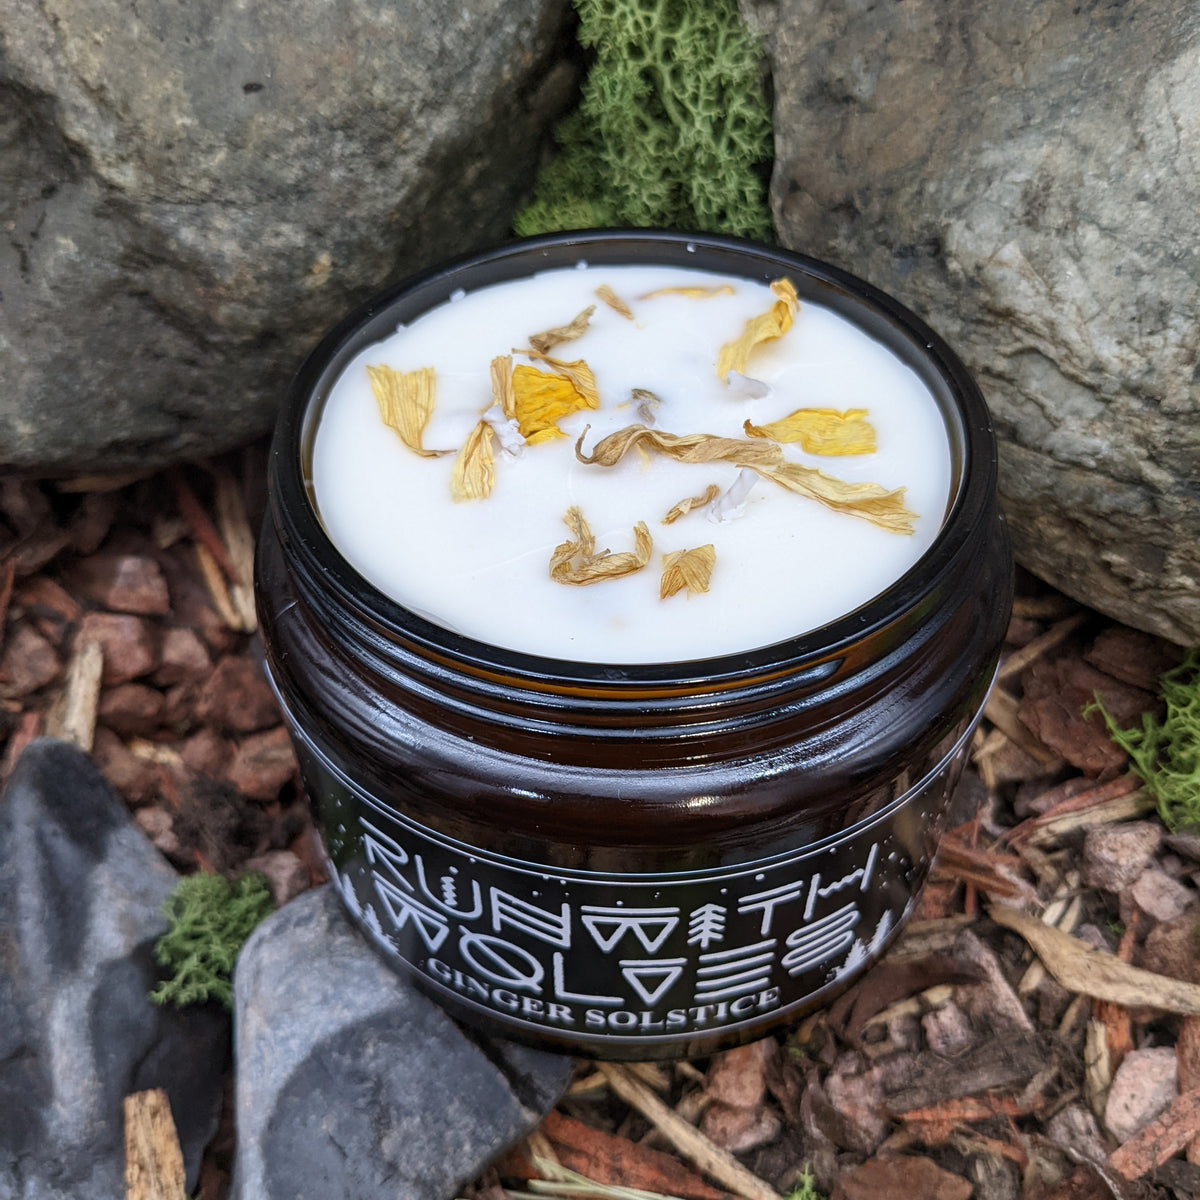 Ginger Solstice Candle 500ml